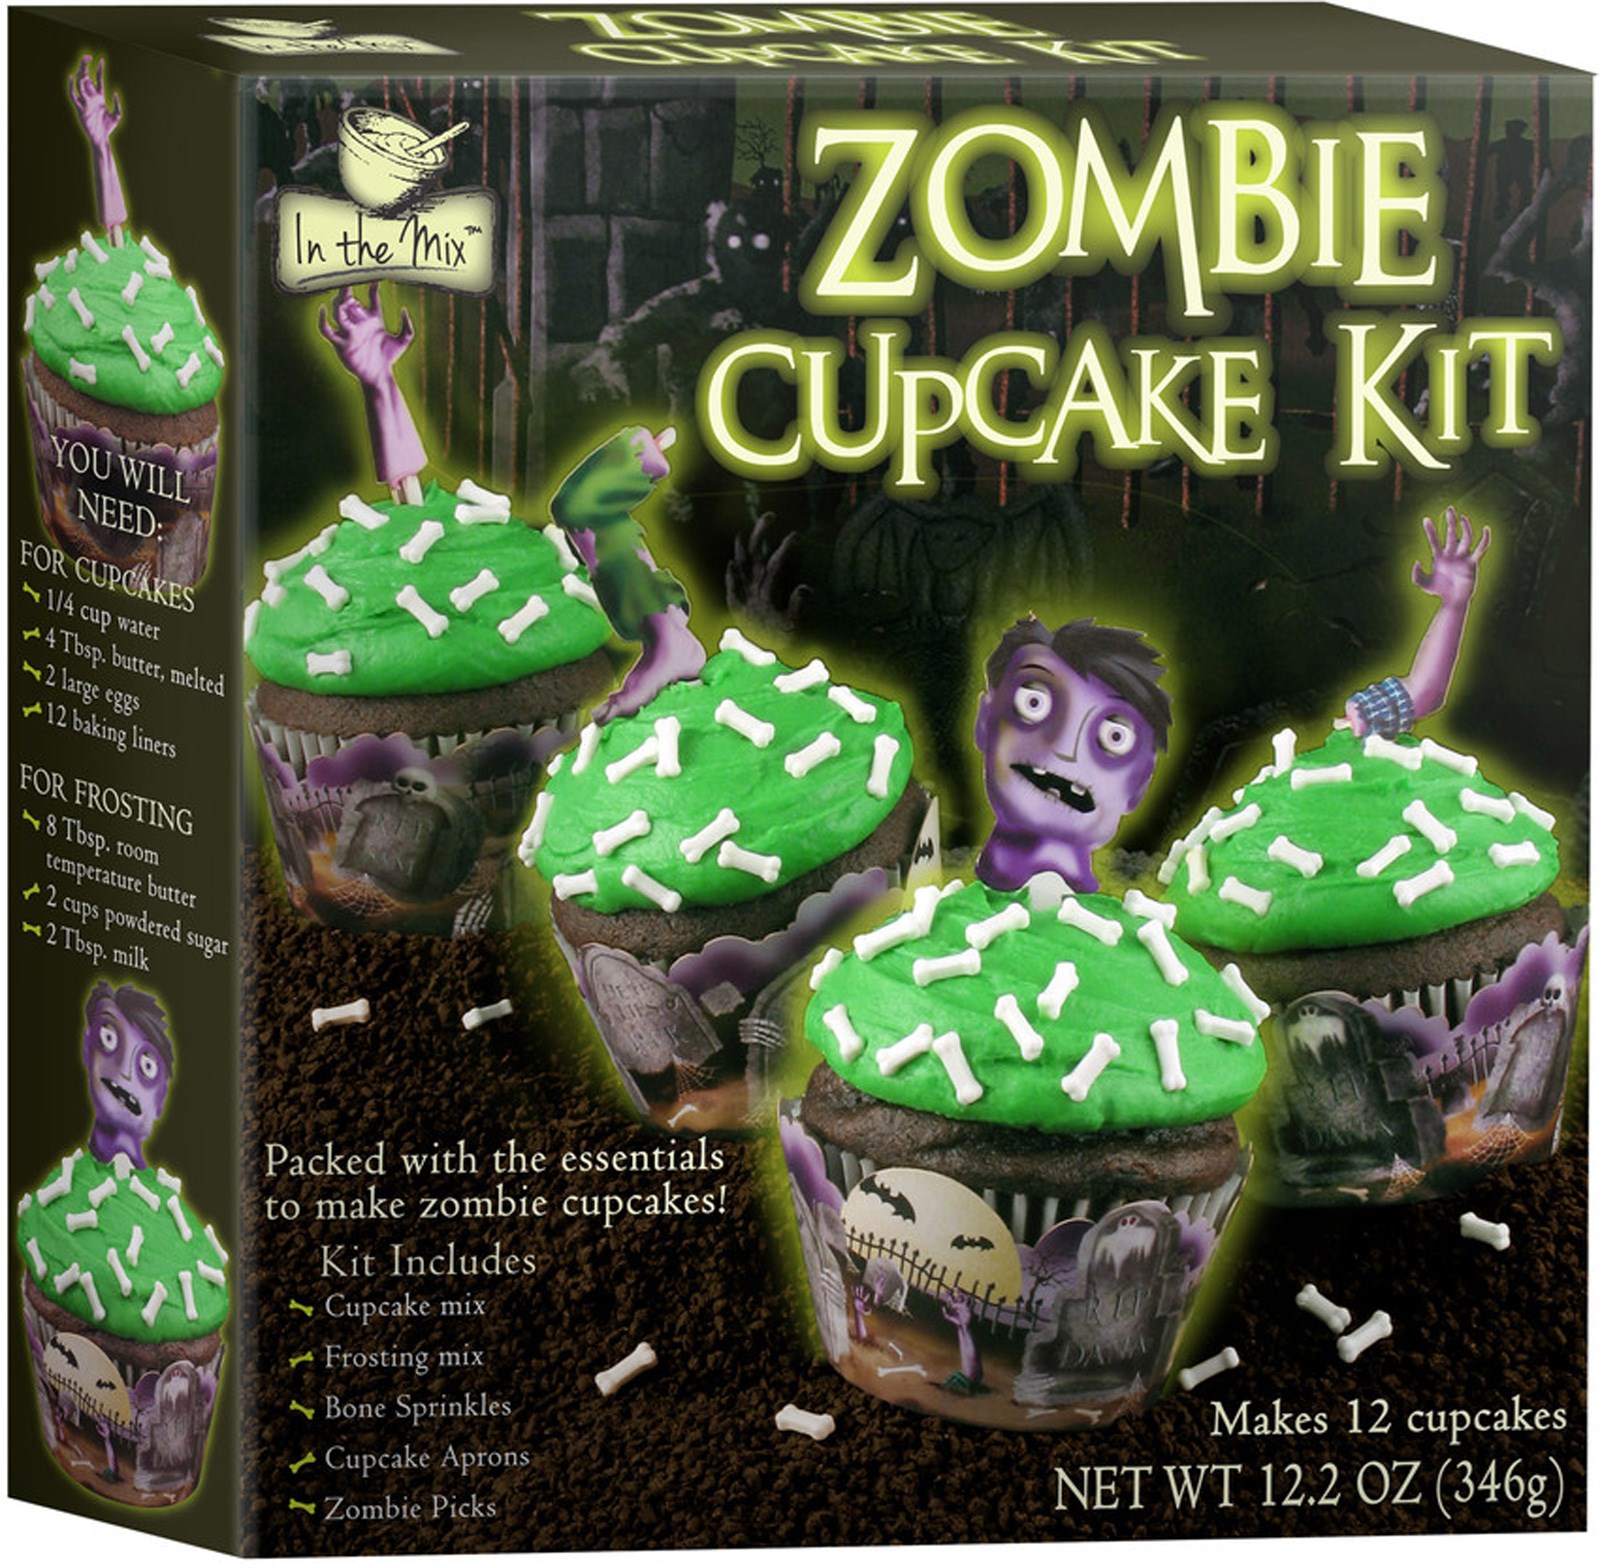 Cupcake Halloween Costumes on Kit Includes Cupcake Mix Frosting Mix Bone Really Sprinkles Cupcake